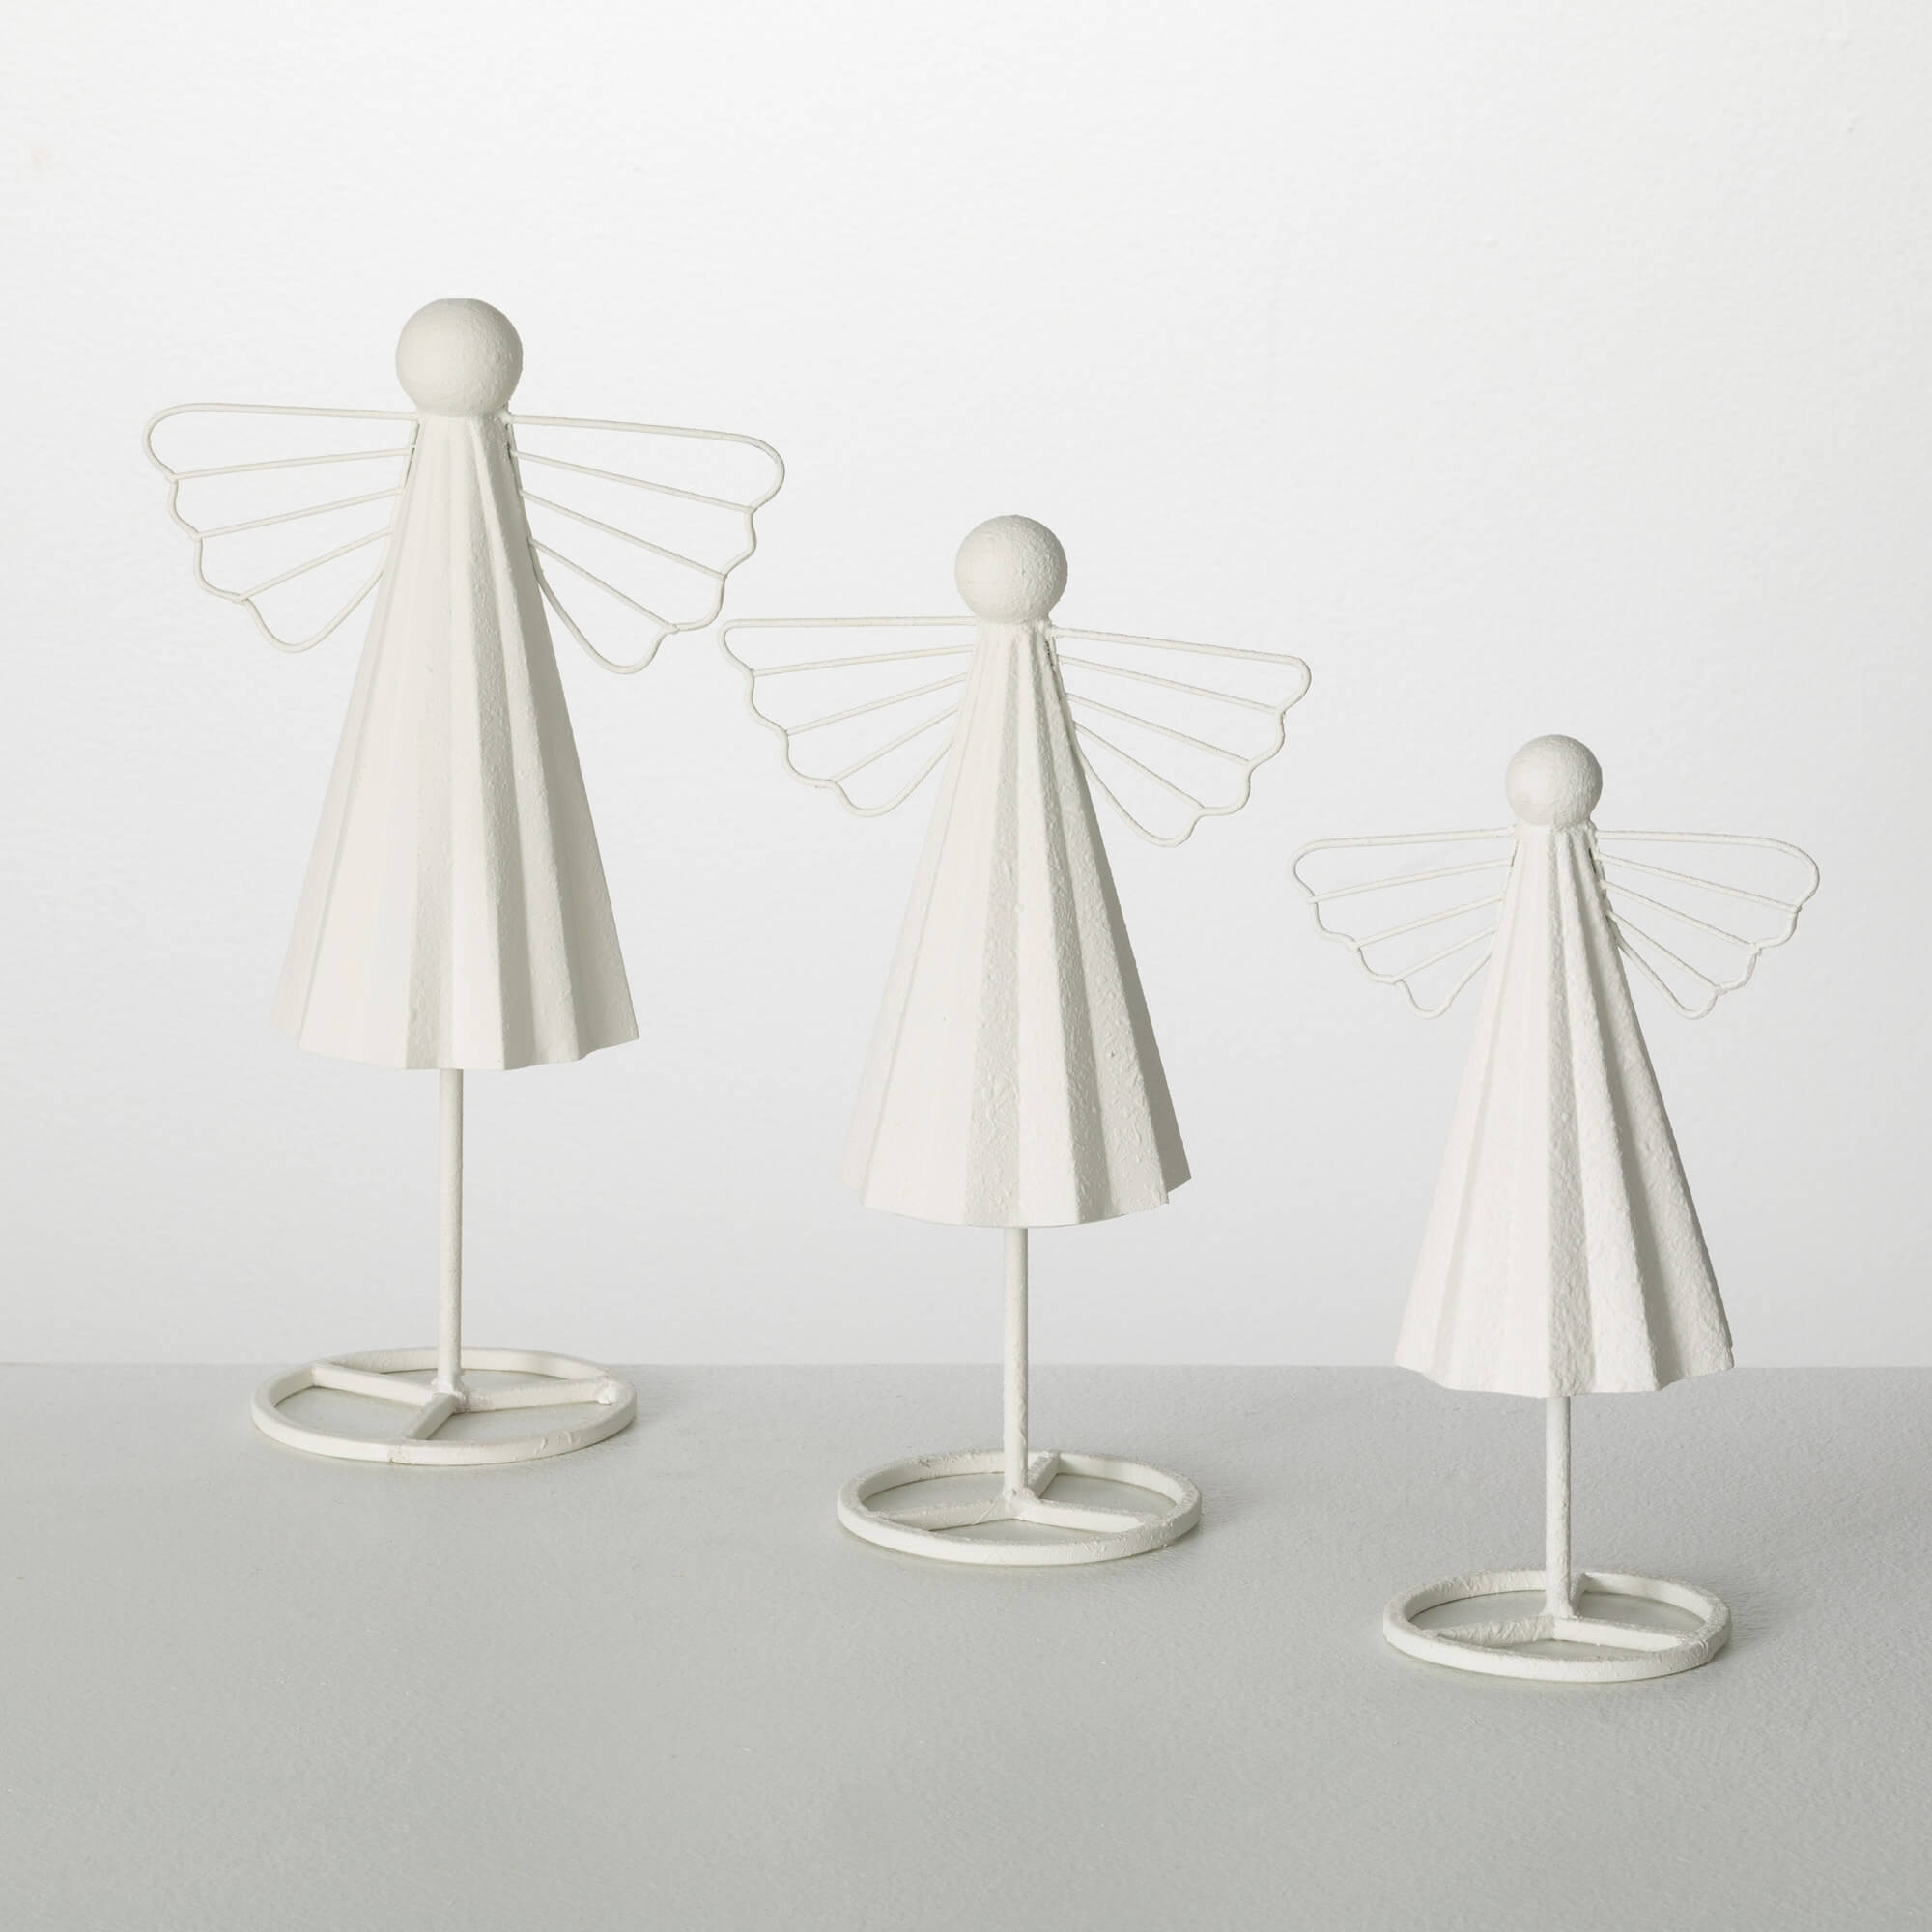 SIMPLE WHITE ANGEL STATUETTES